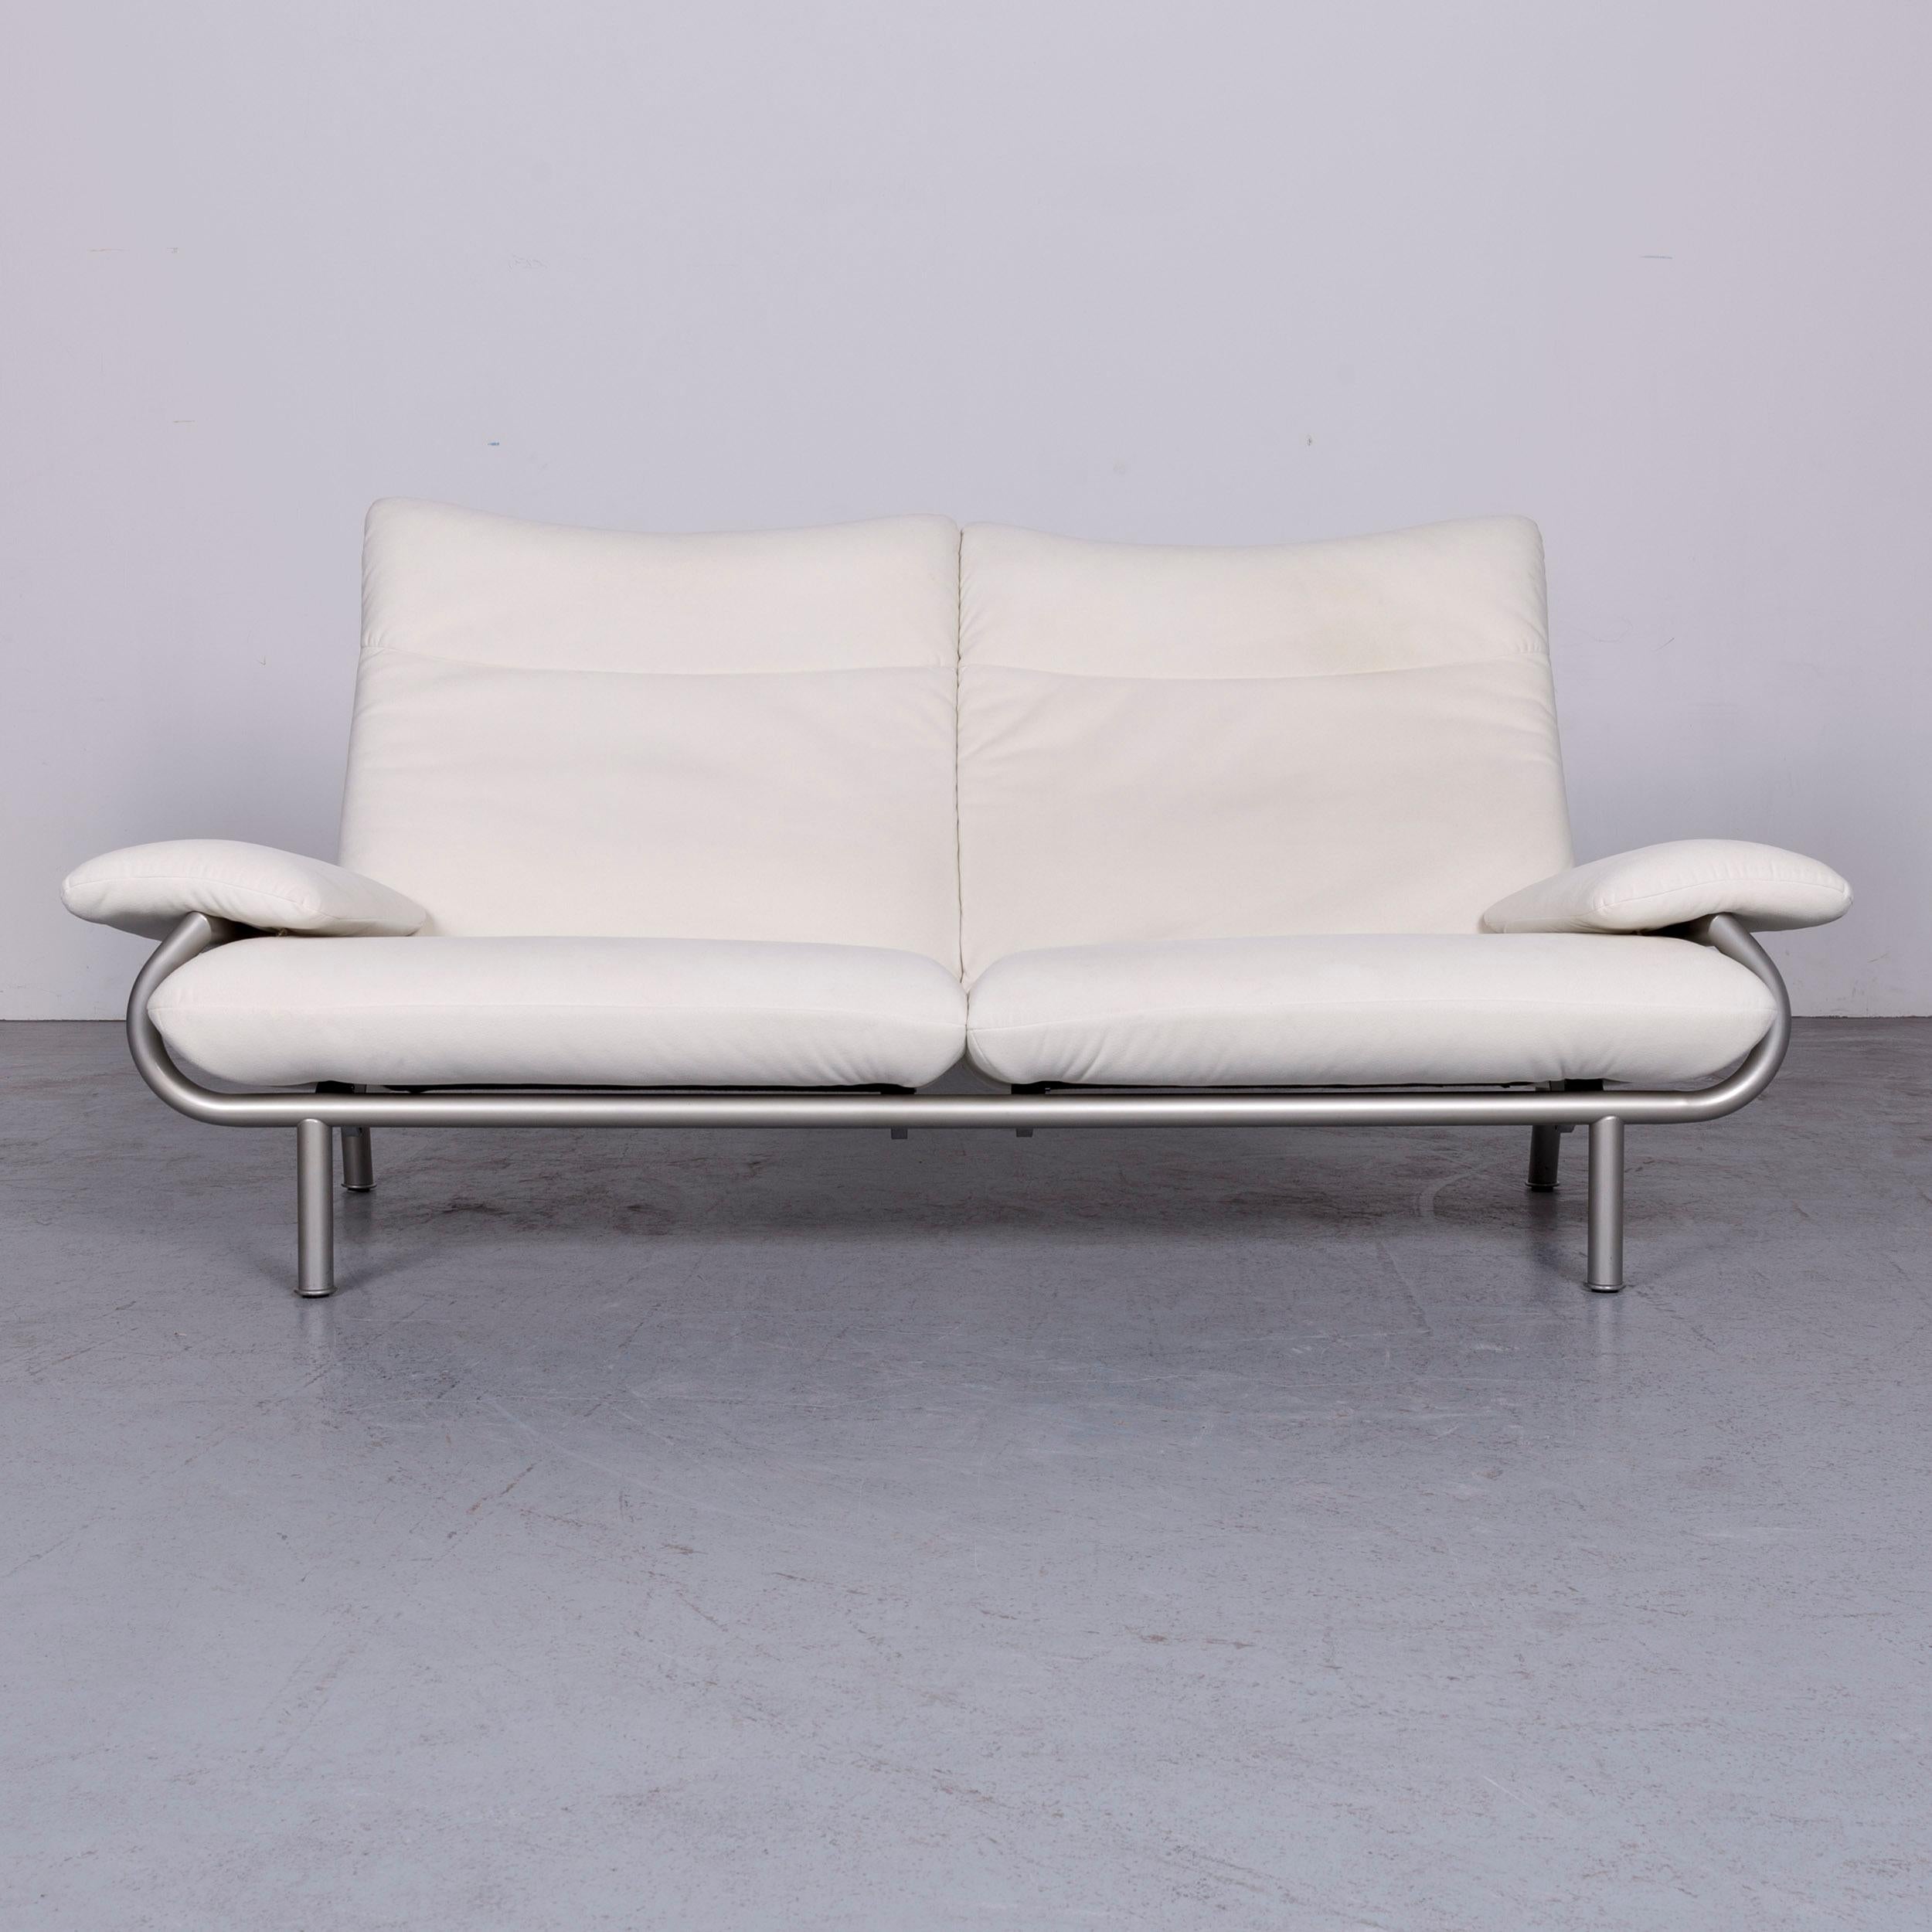 We bring to you a Laauser designer fabric sofa set white three-seat two-seat couch.